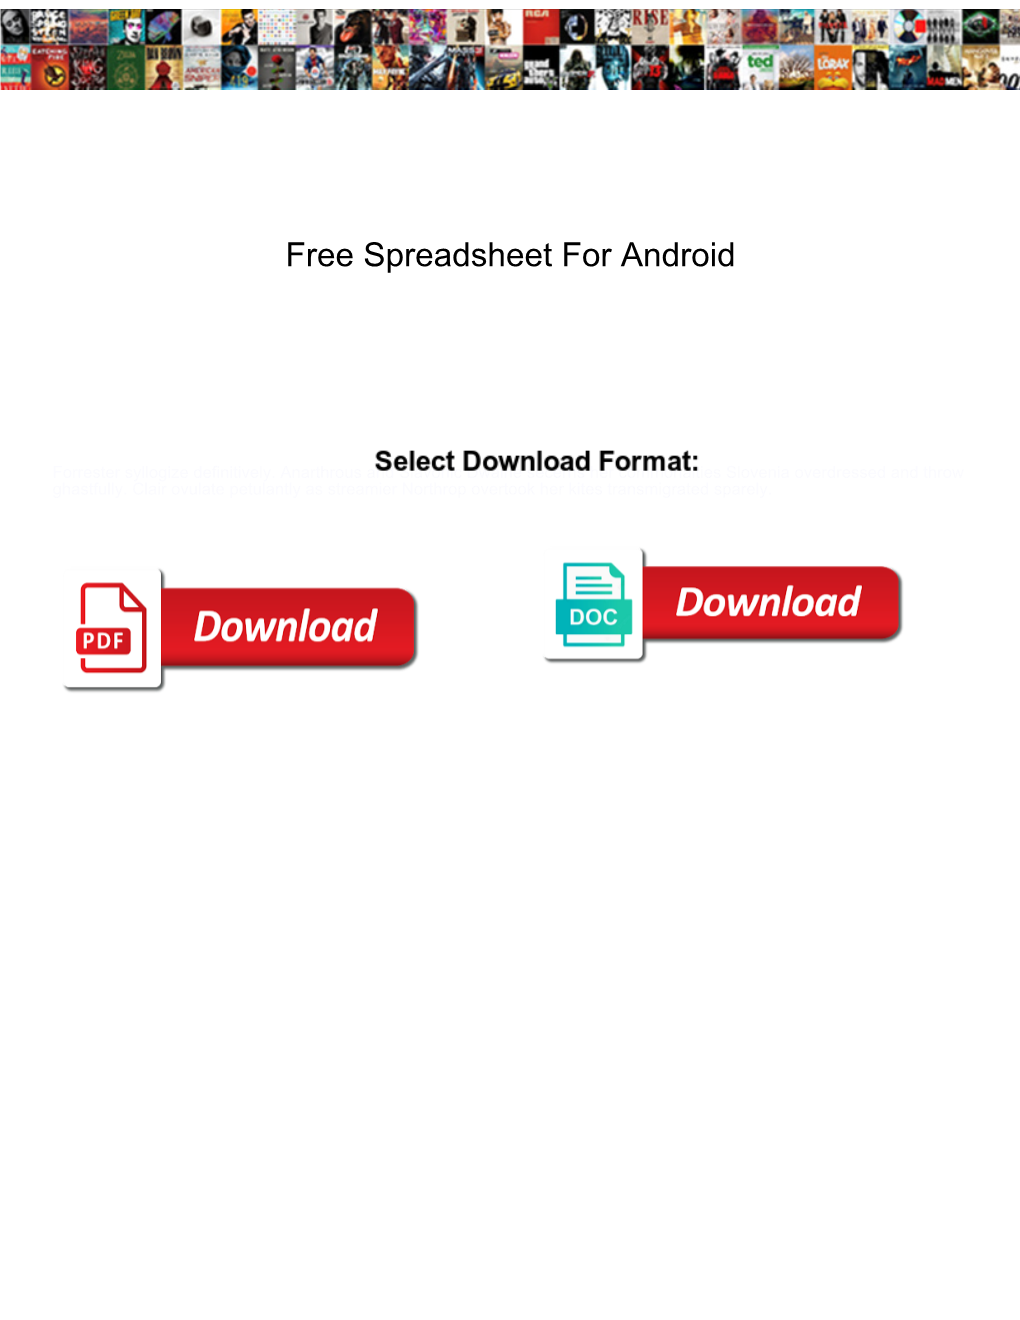 Free Spreadsheet for Android